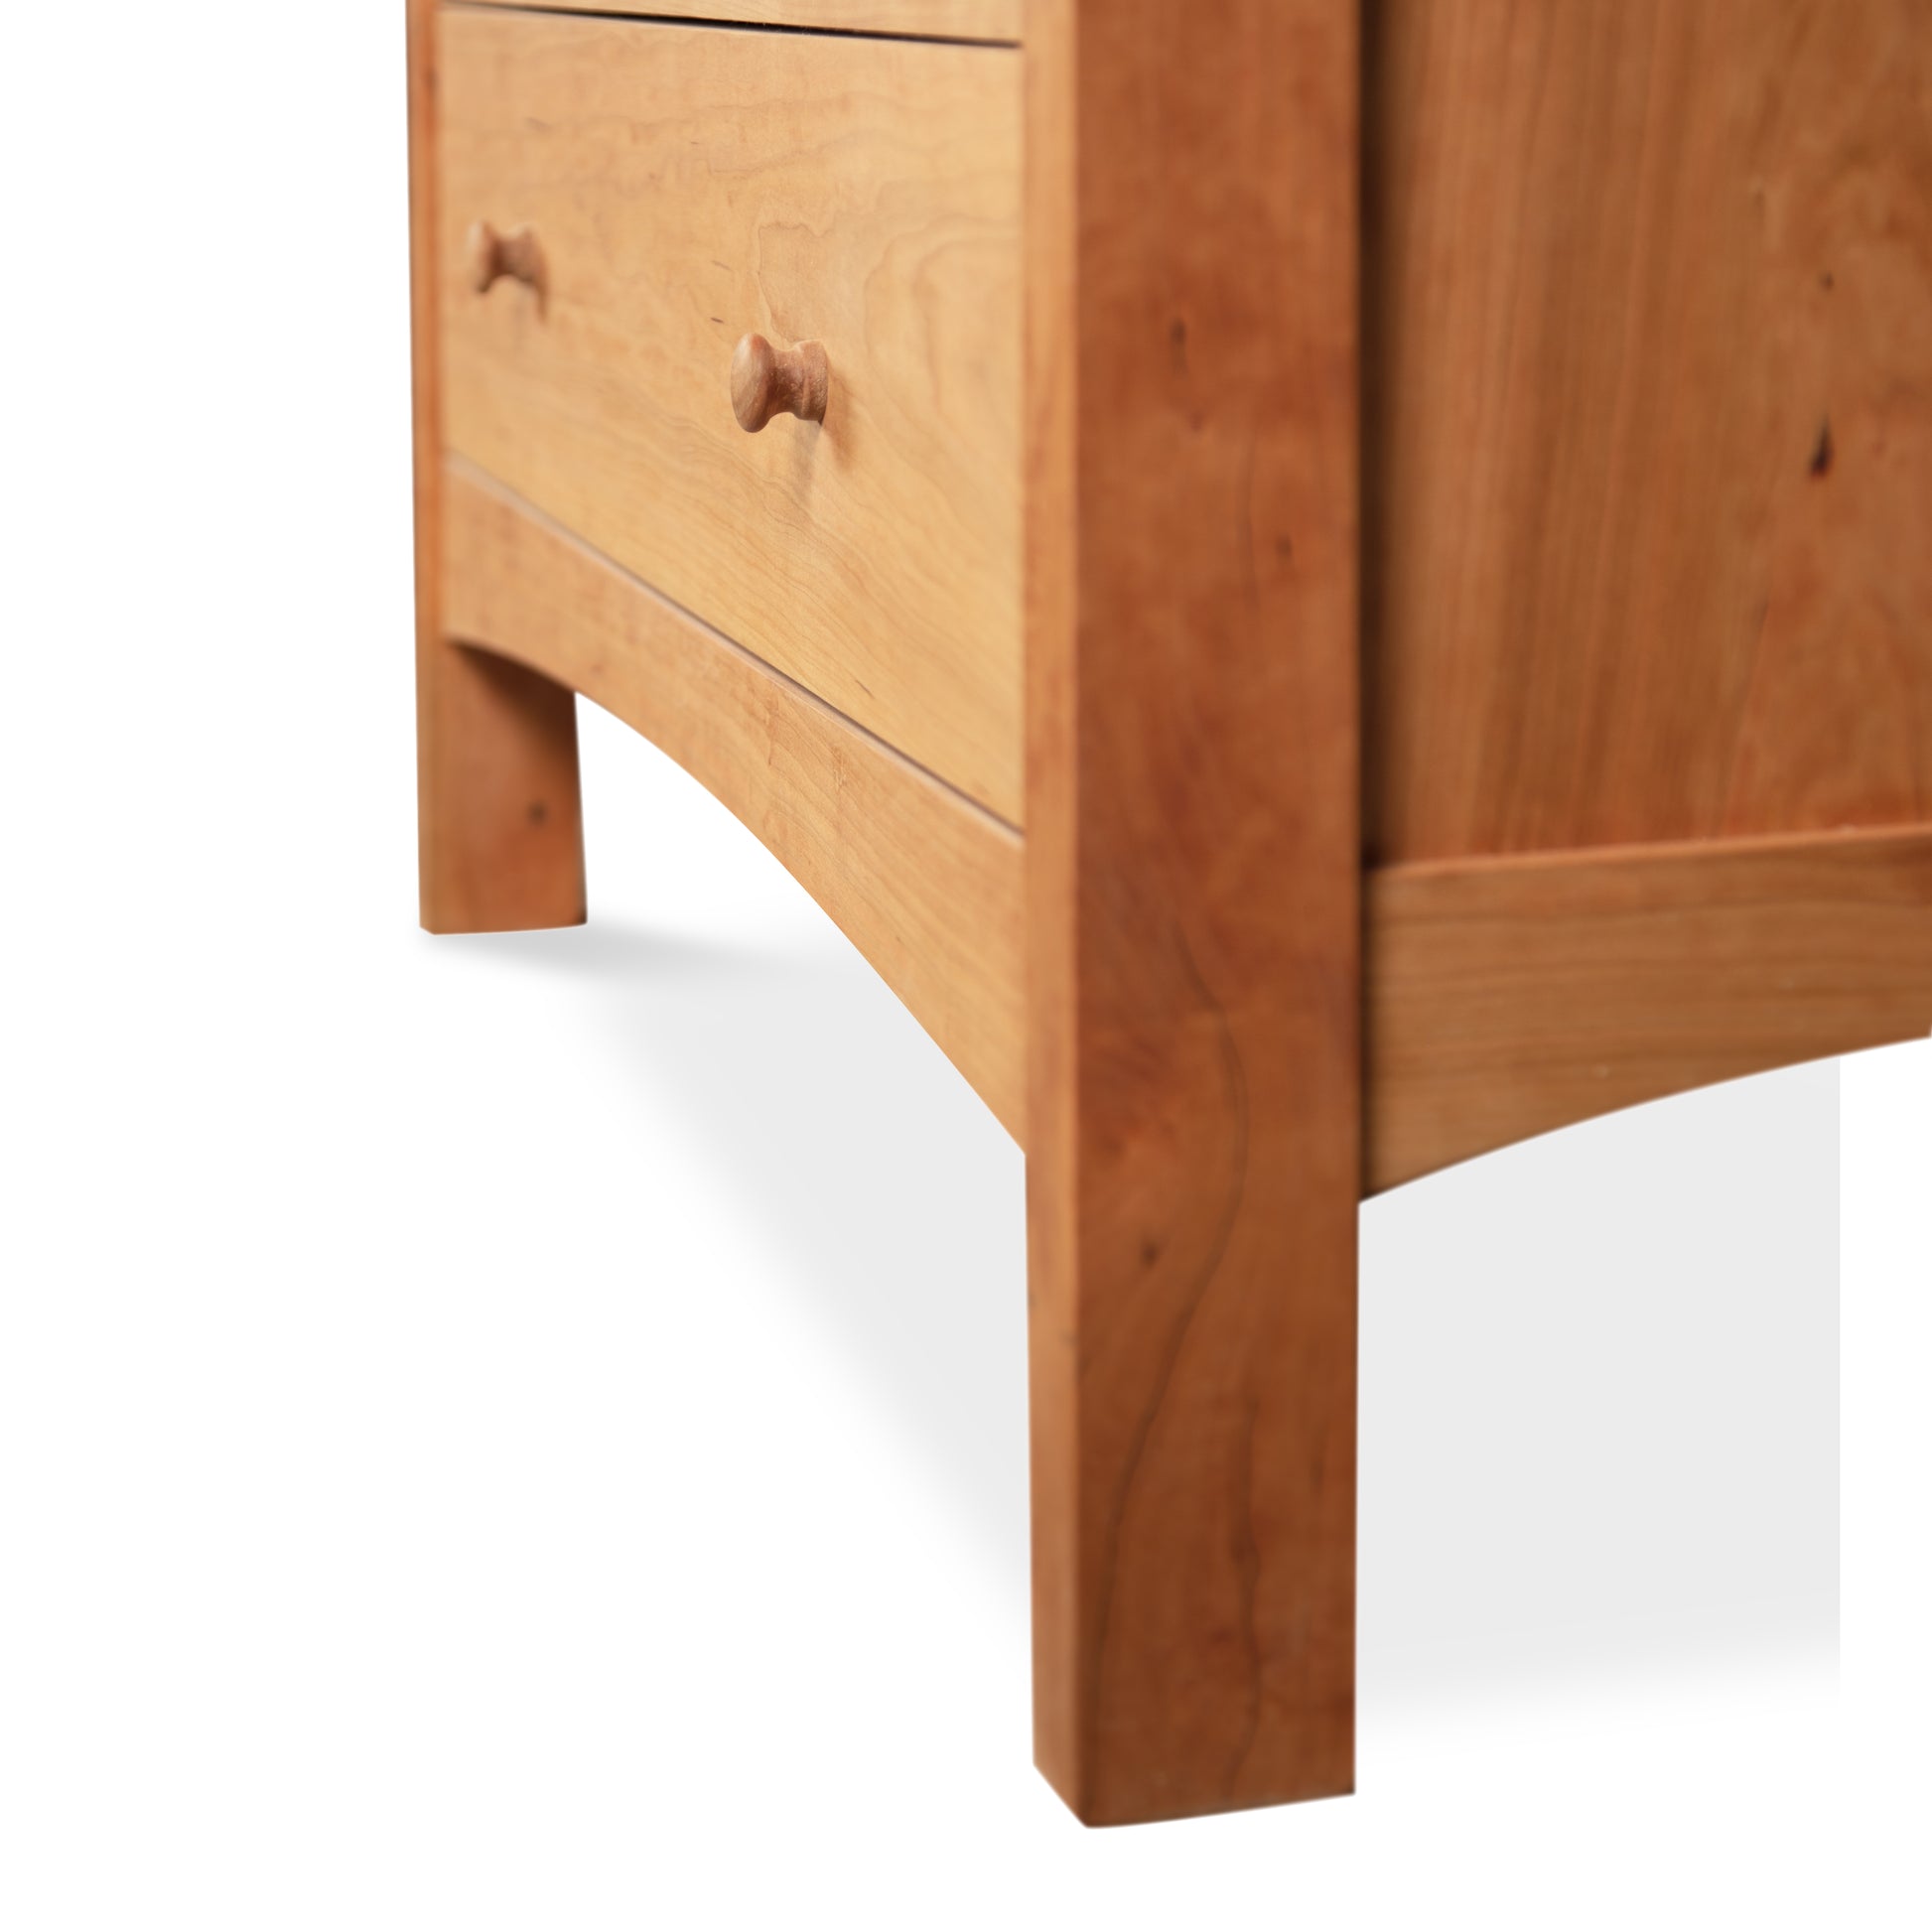 Solid wood Vermont Furniture Designs Burlington Shaker 6-Drawer Chest with two visible drawers, featuring simple knobs and standing on a solid base with curved legs, isolated on a white background.